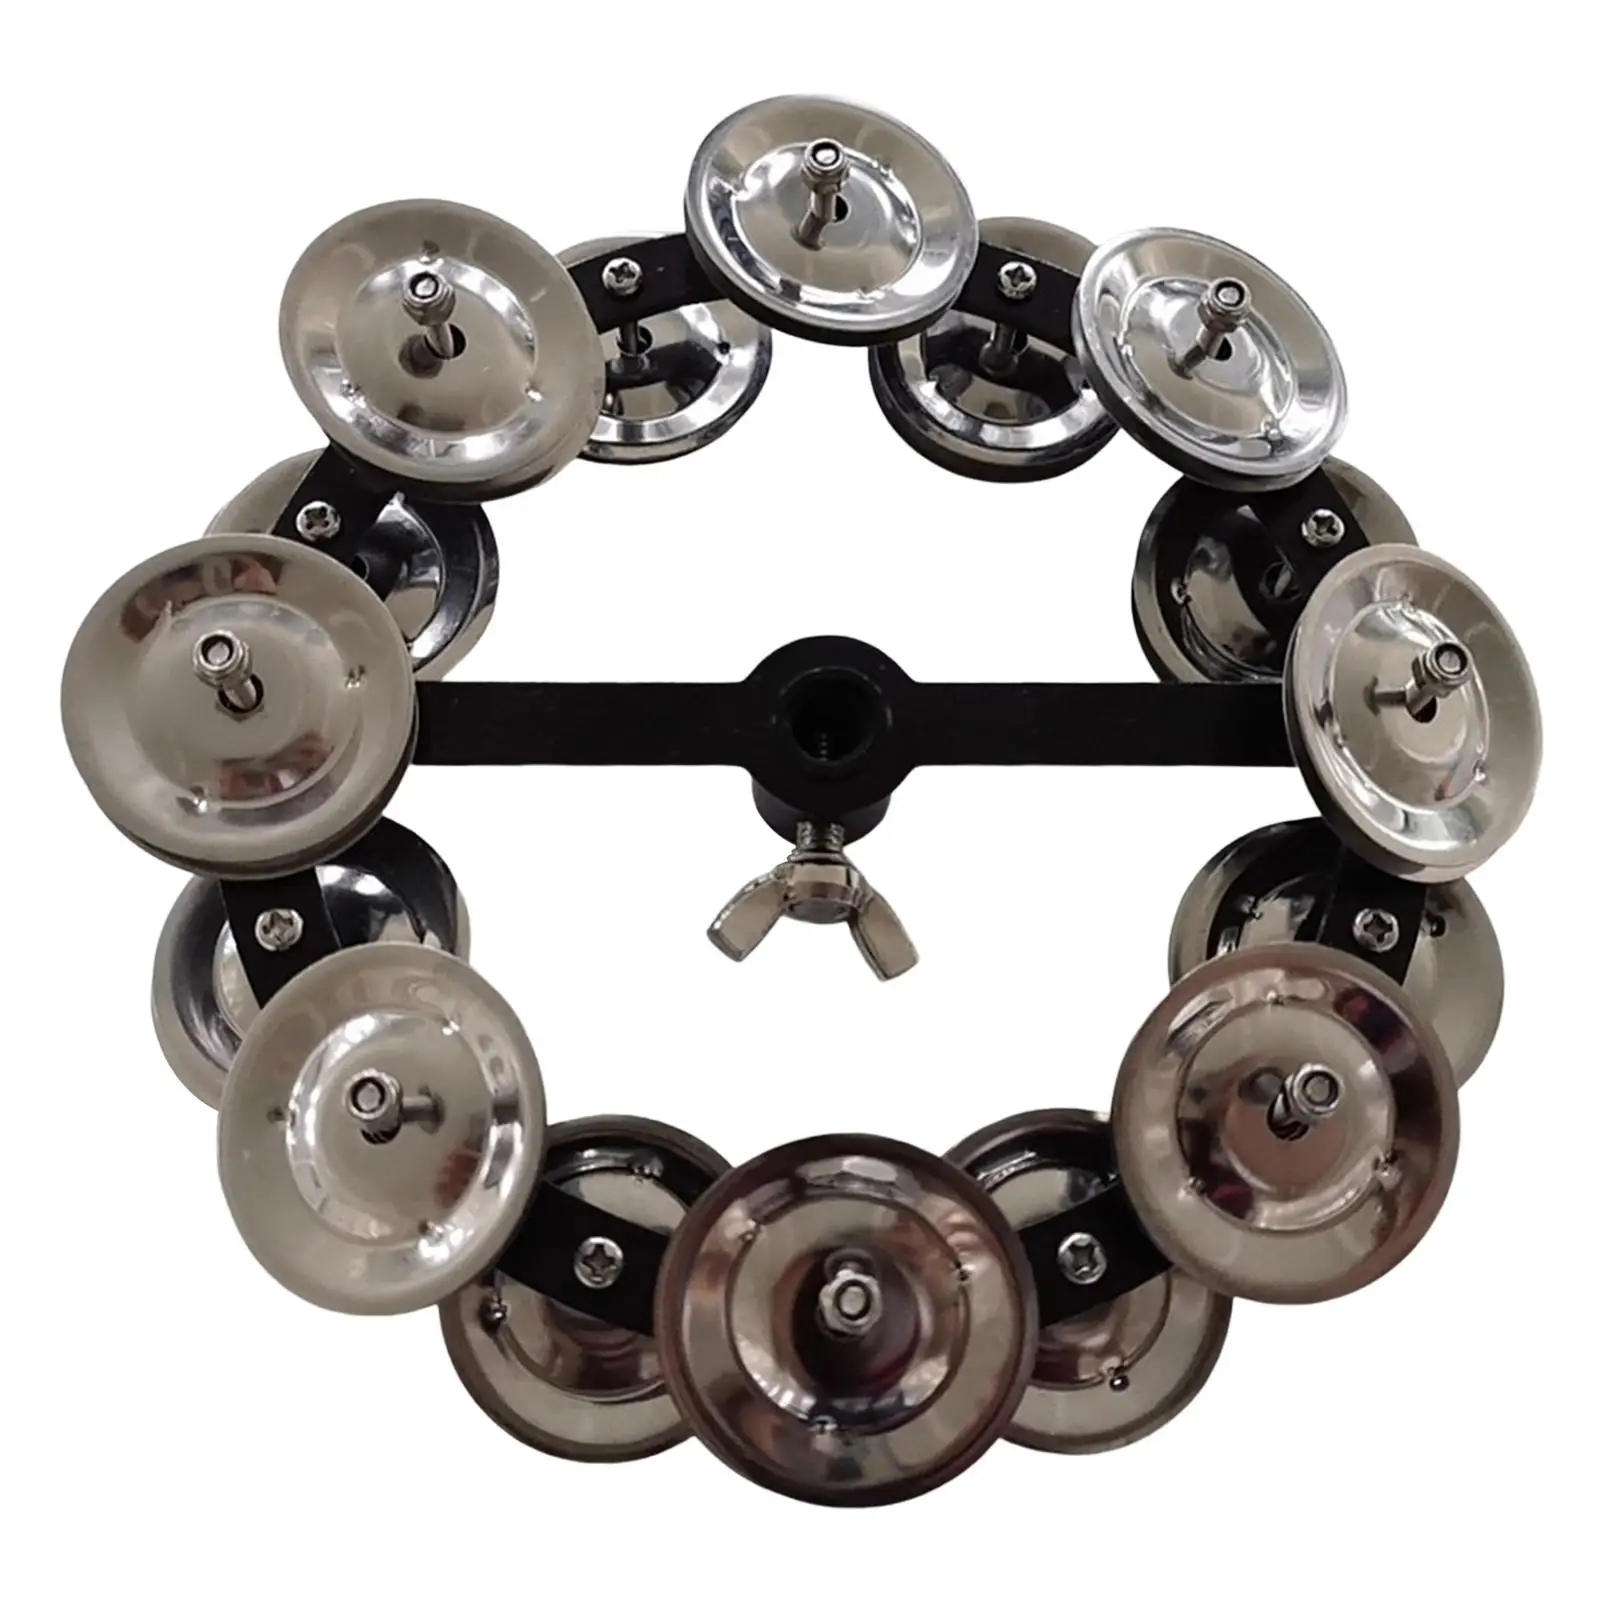 Metal Hi Hat Tambourine with Double Row Percussion Instrument